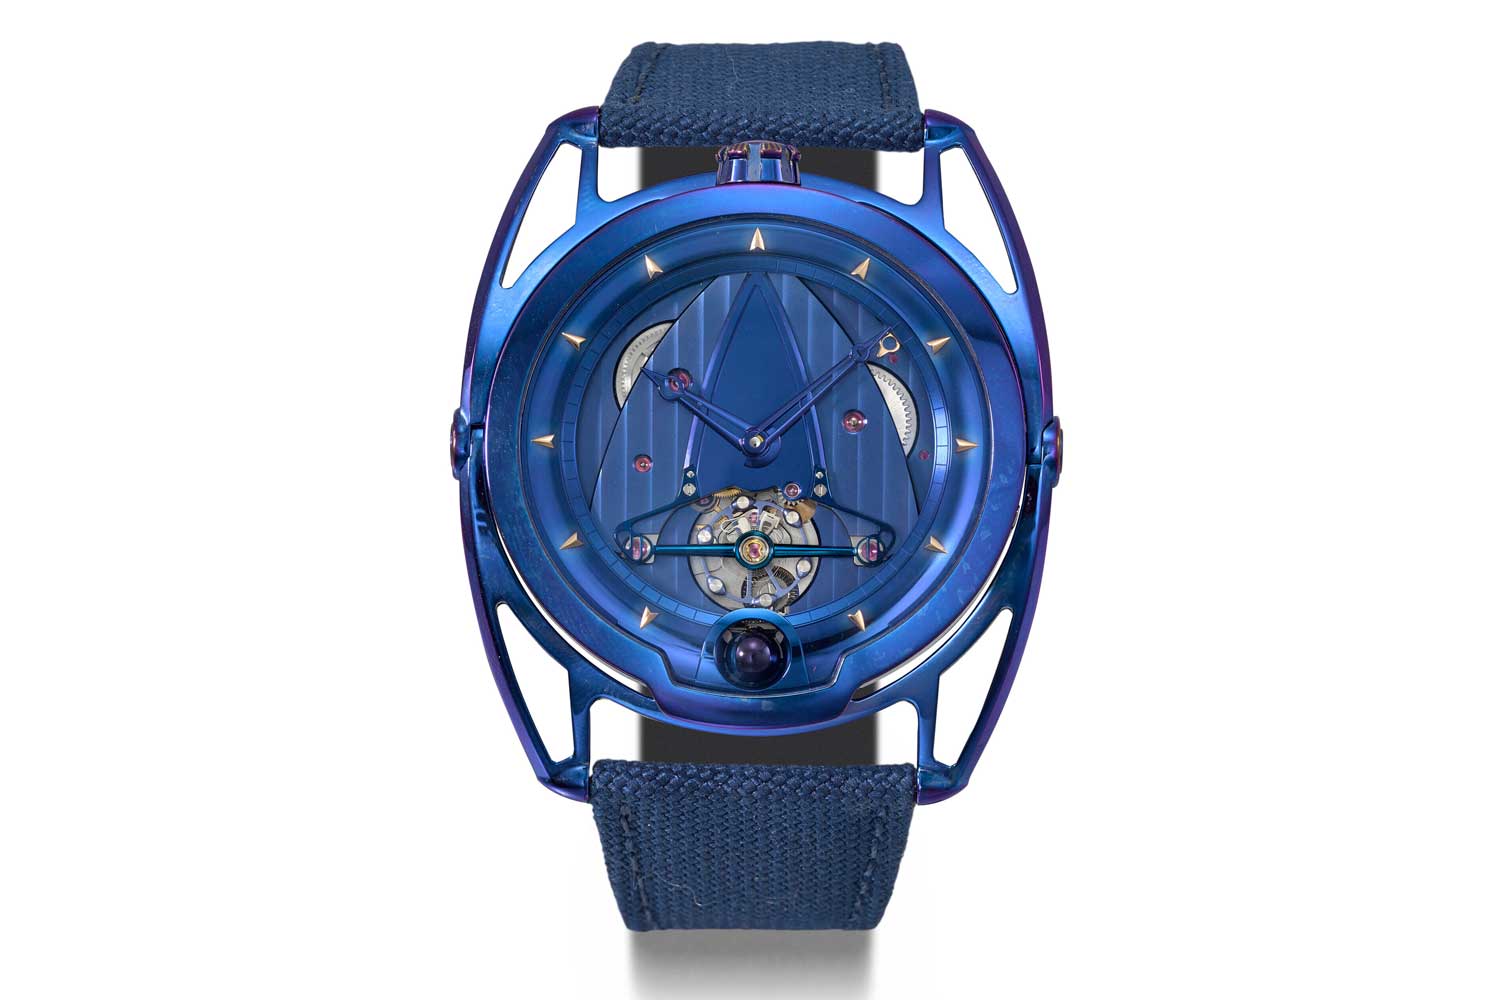 Lot 55: De Bethune 'A Kind of Blue' reference DB28 from 2020 (Image: Christie's)